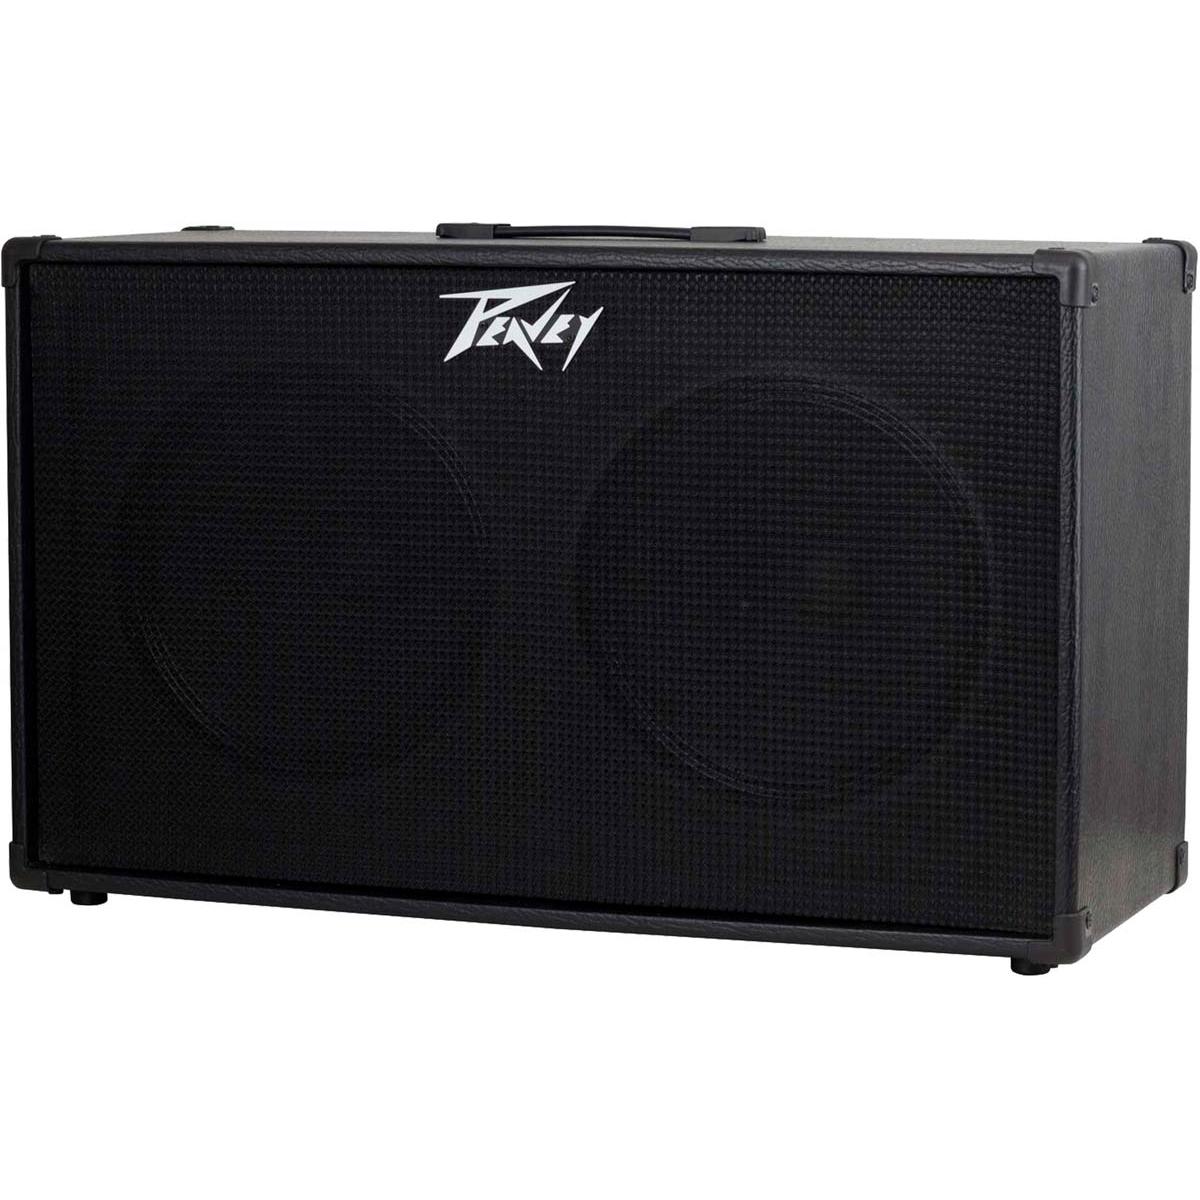 PEAVEY 212 EXTENSION CABINET